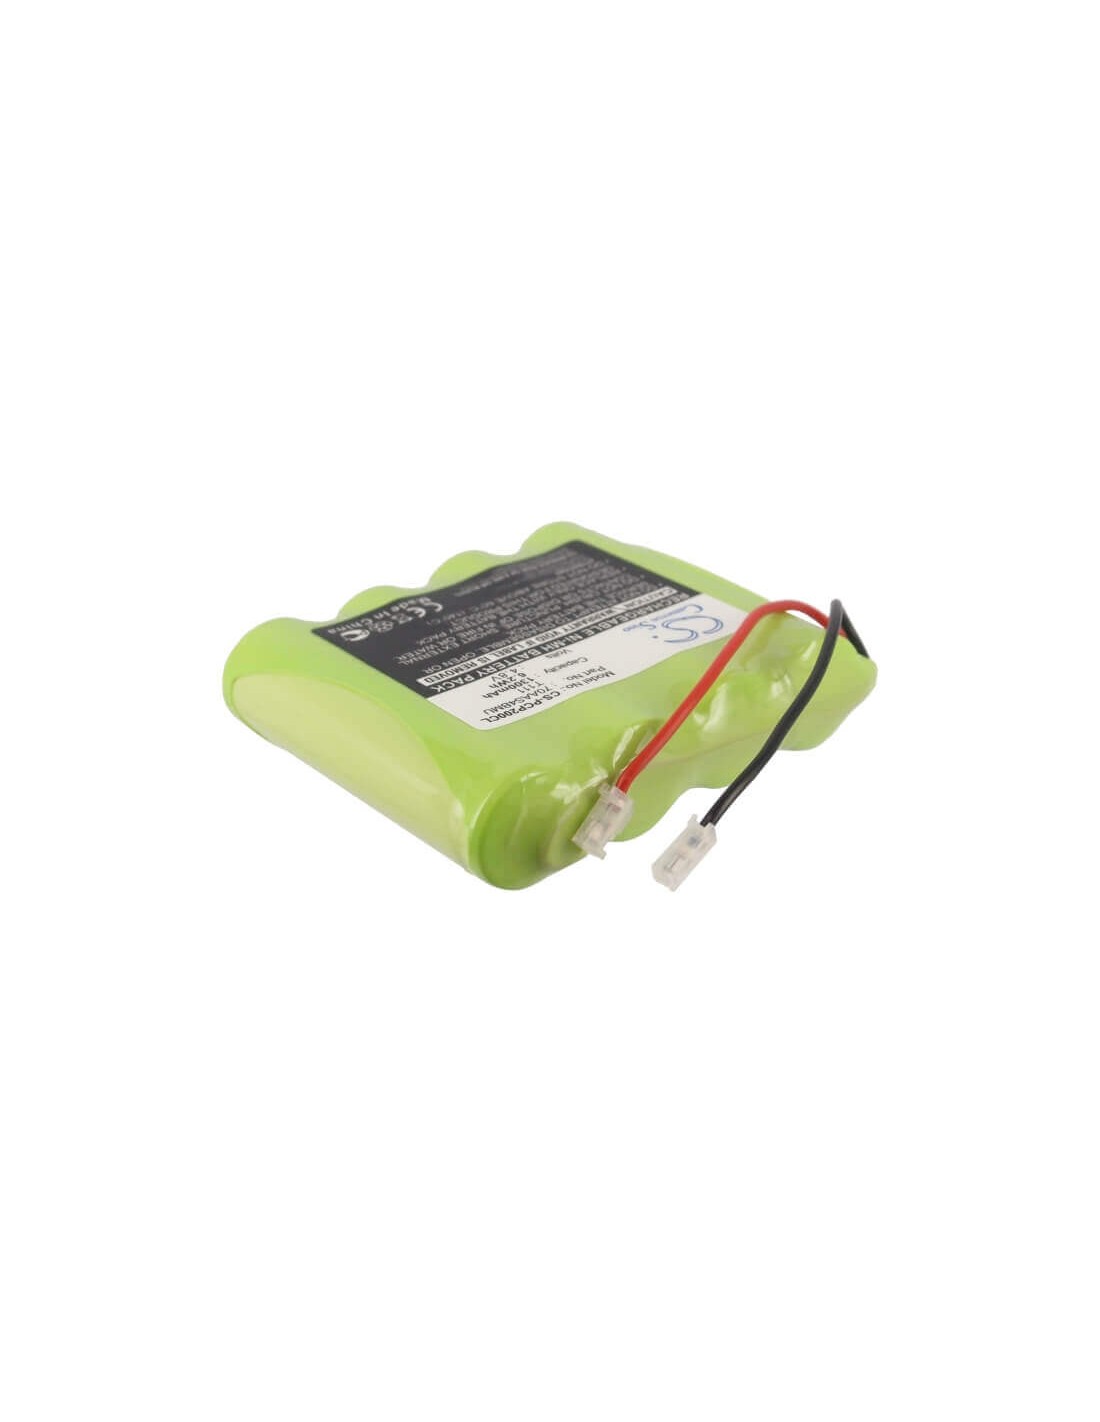 Battery for Cobra, Cp200, Cp200s 4.8V, 1300mAh - 6.24Wh